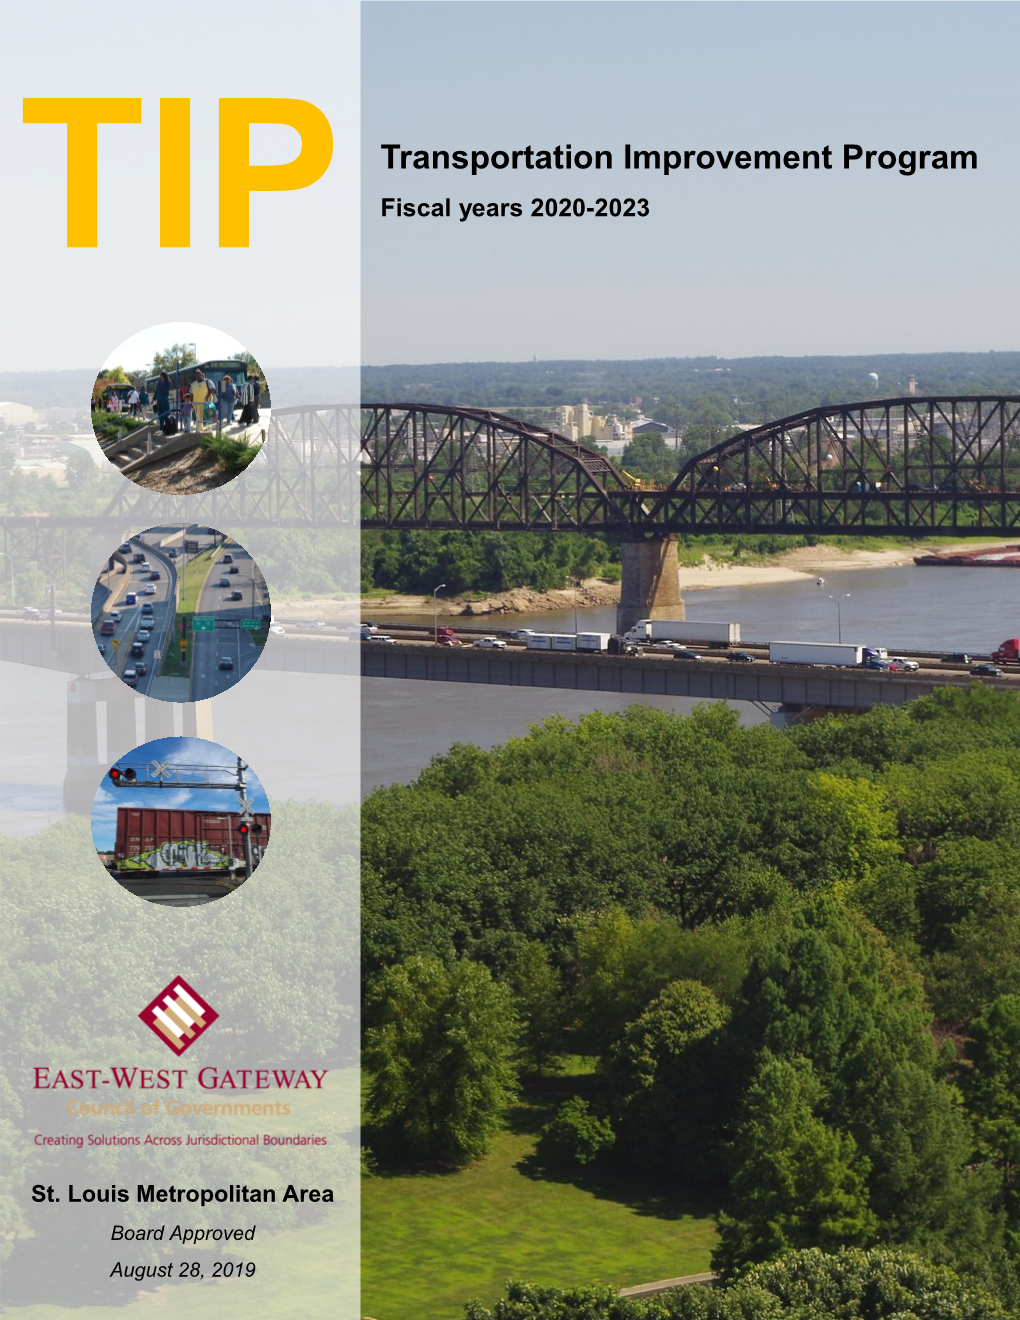 Transportation Improvement Program (TIP) Is a Schedule of Transportation Improvements Planned by Various Agencies in the St